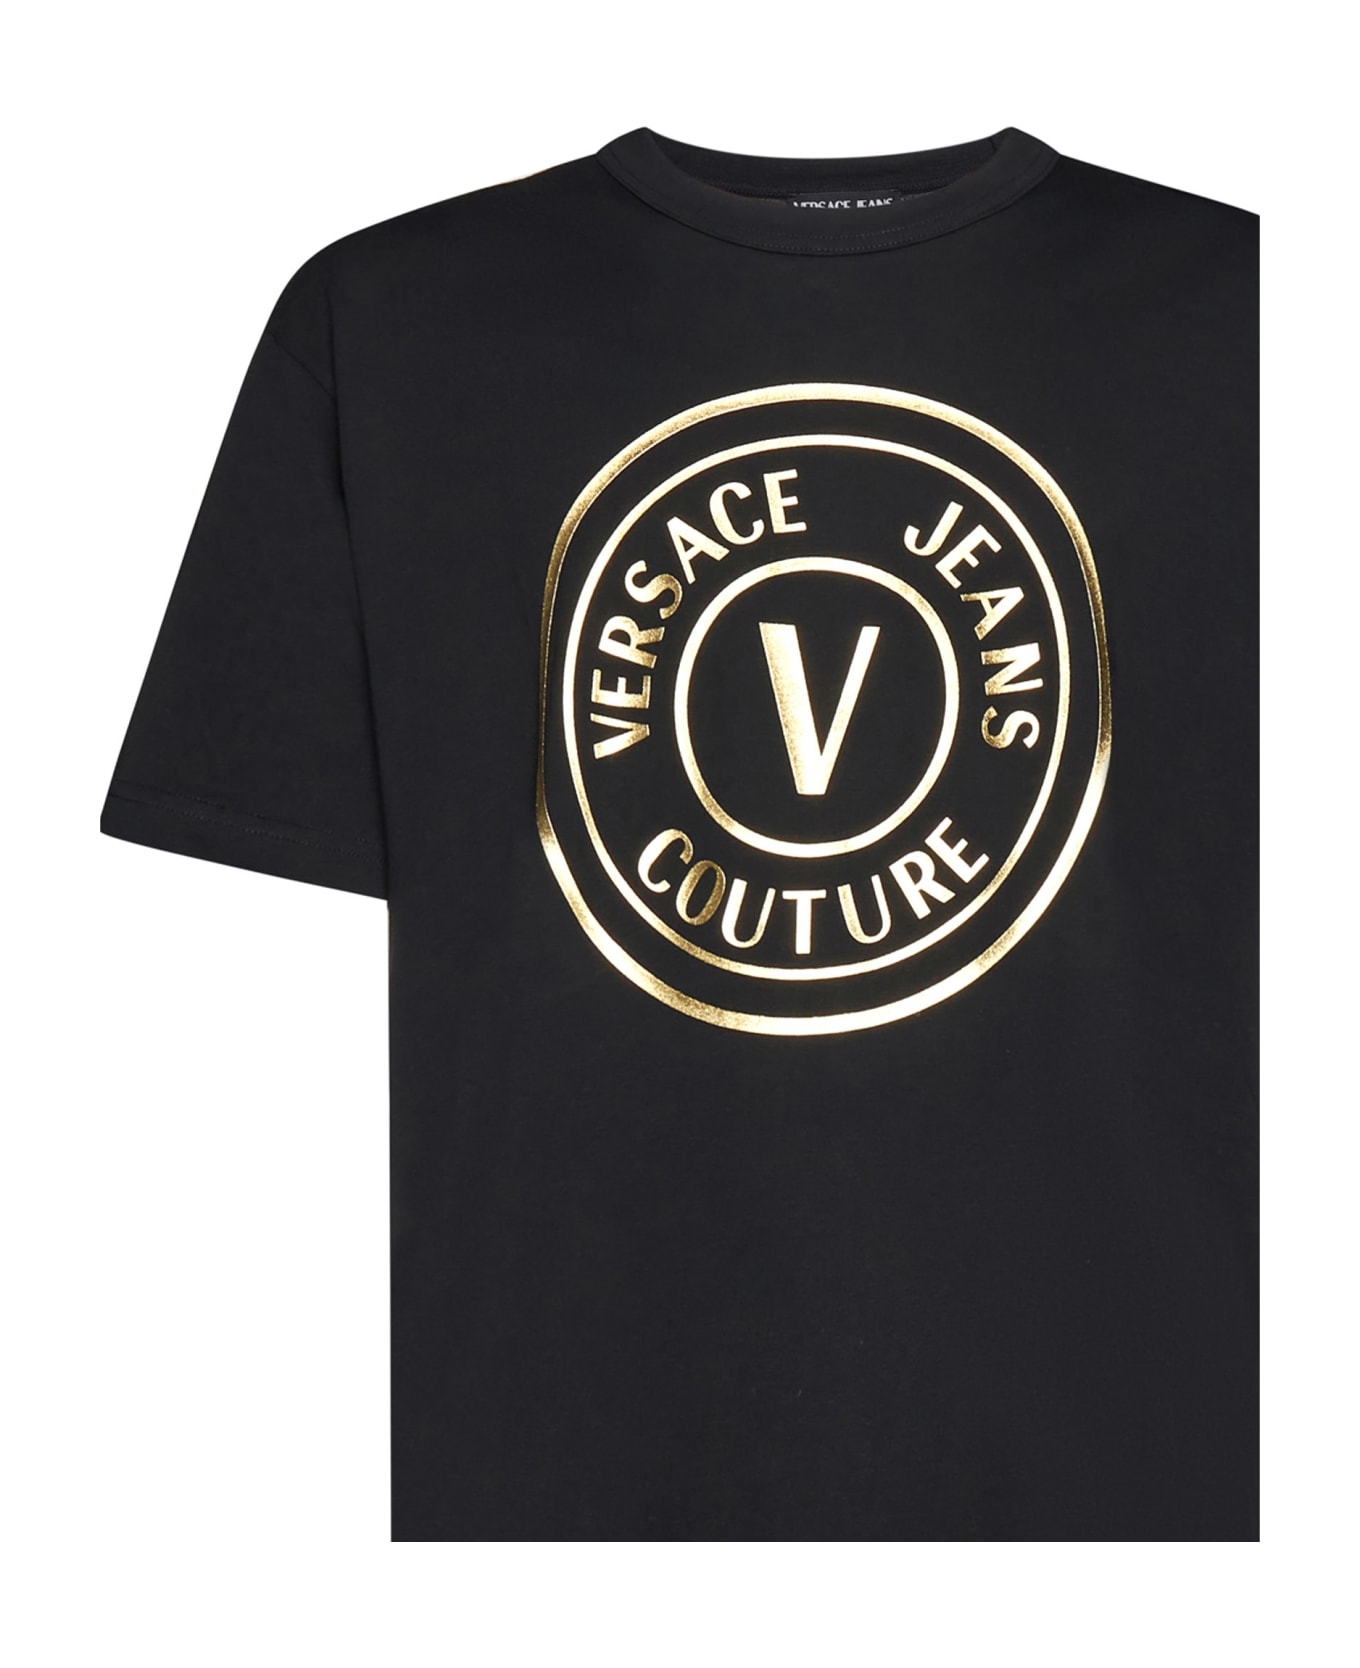 Versace Jeans Couture T-shirt - Black シャツ